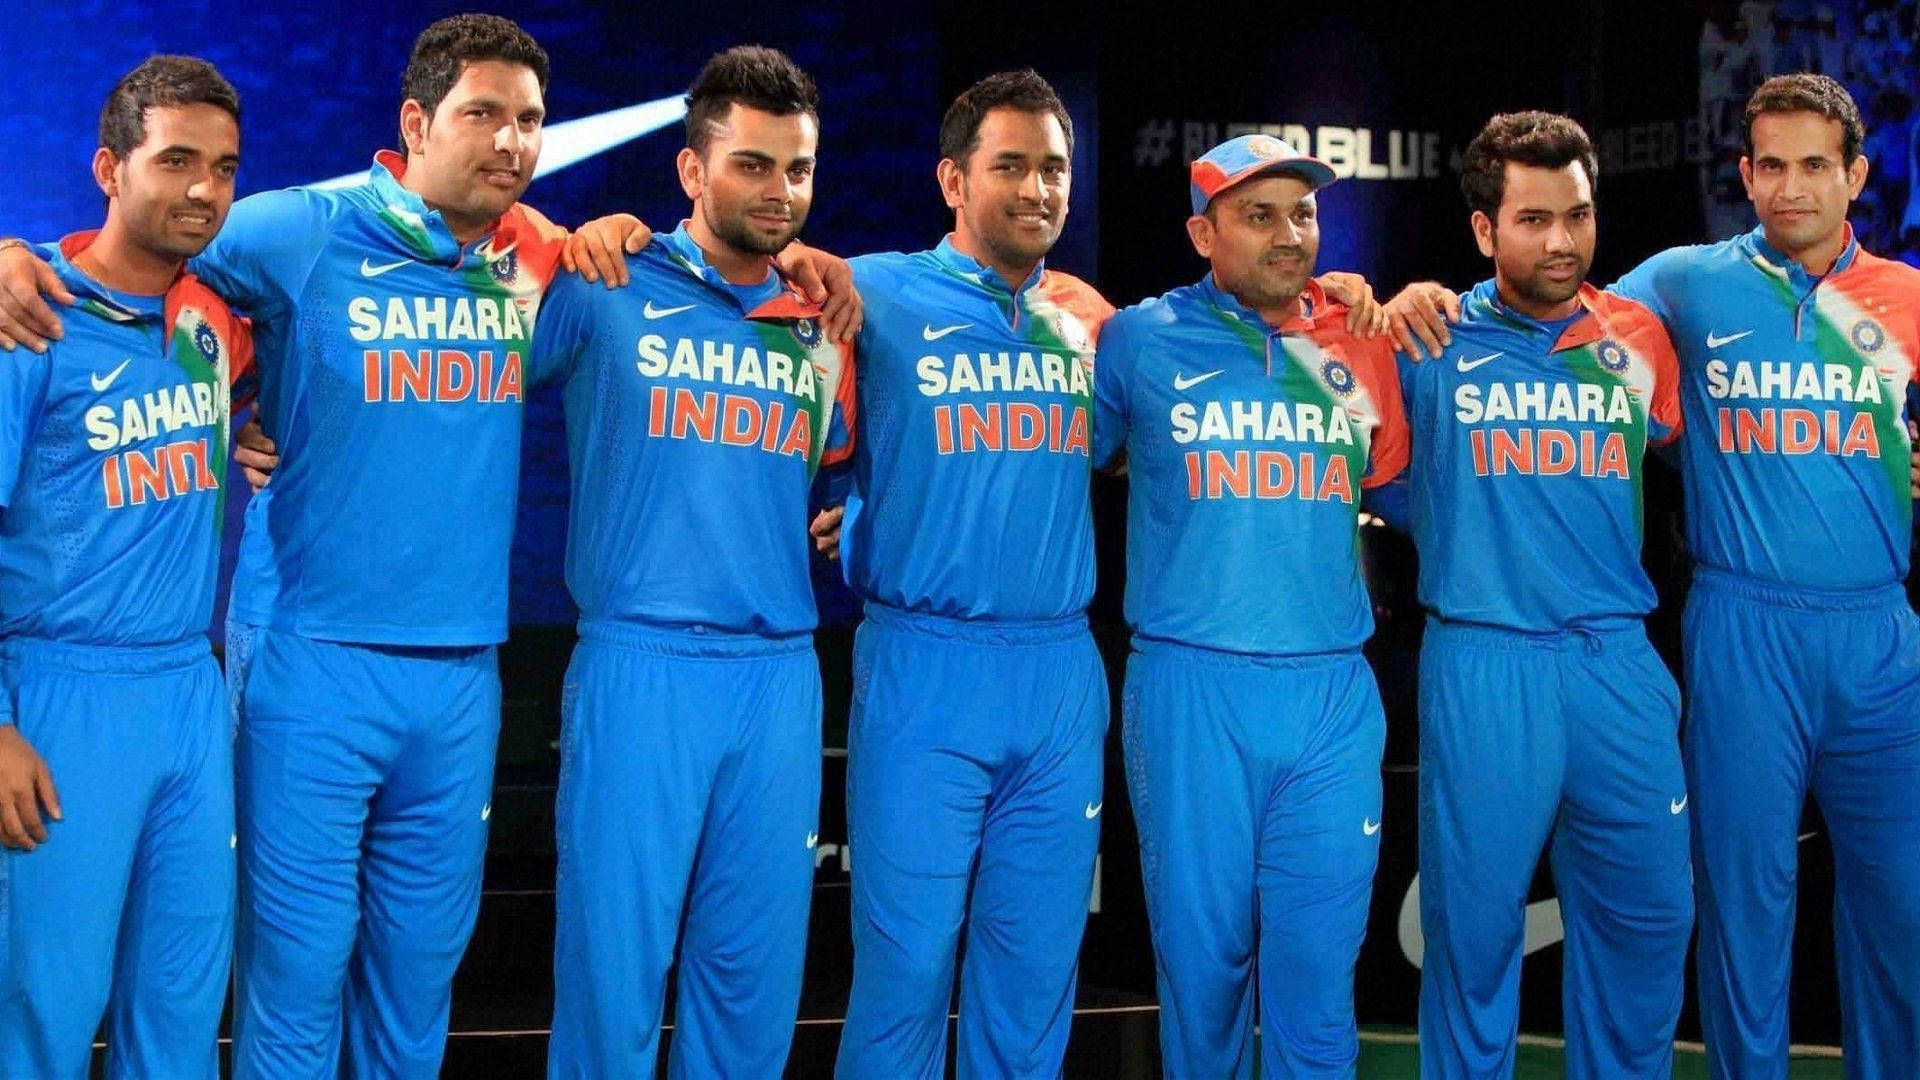 Pride of India: The Glorious Indian Cricket Team Wallpaper